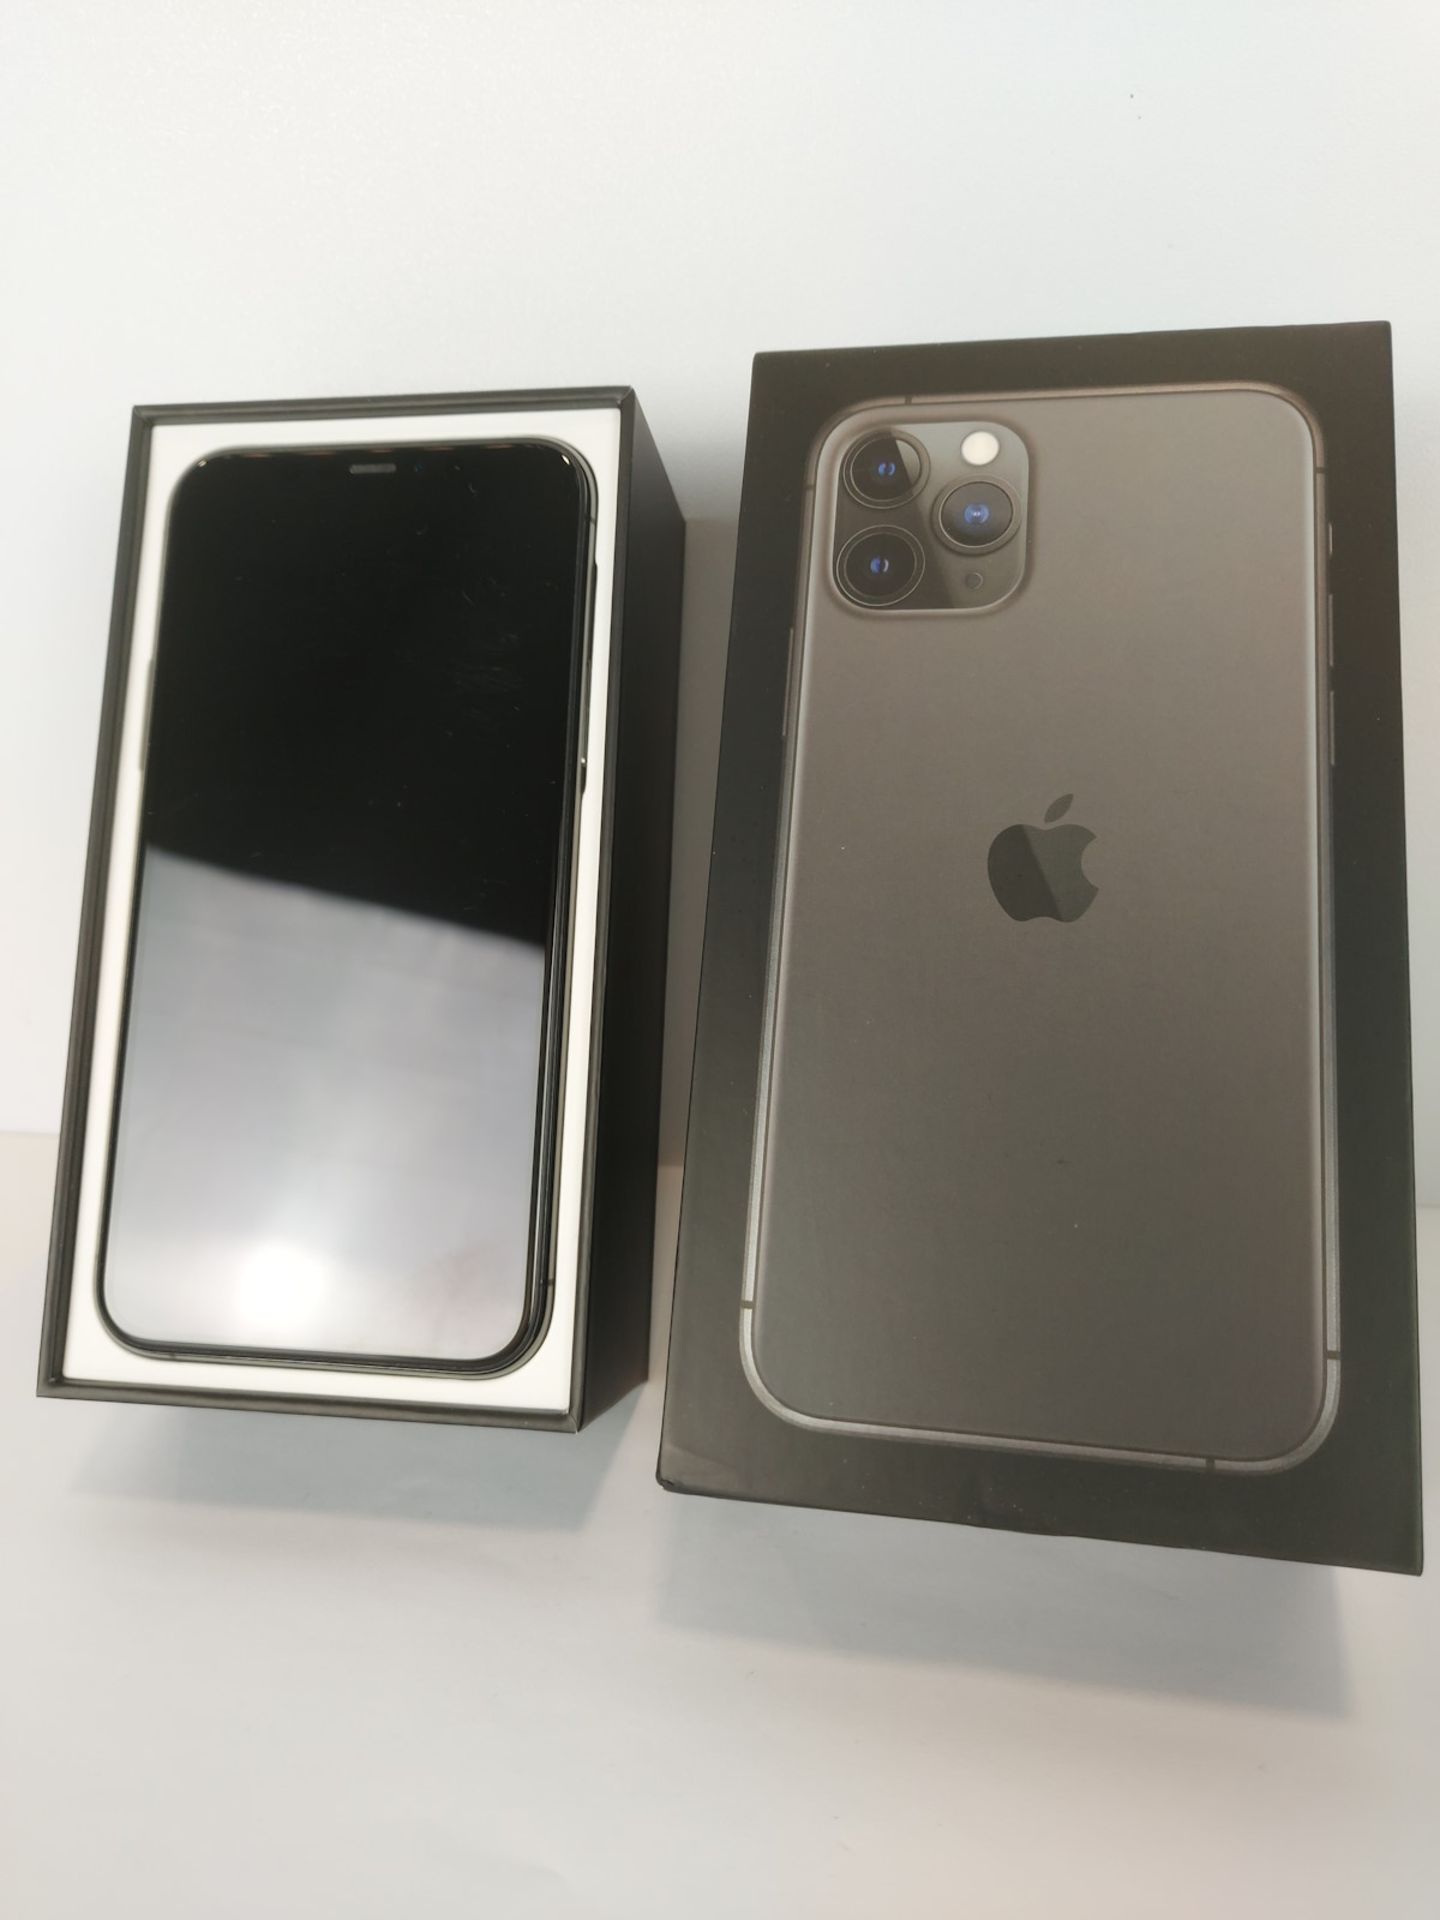 Apple iPhone 11 Pro, Silver, 64GB - Image 3 of 3